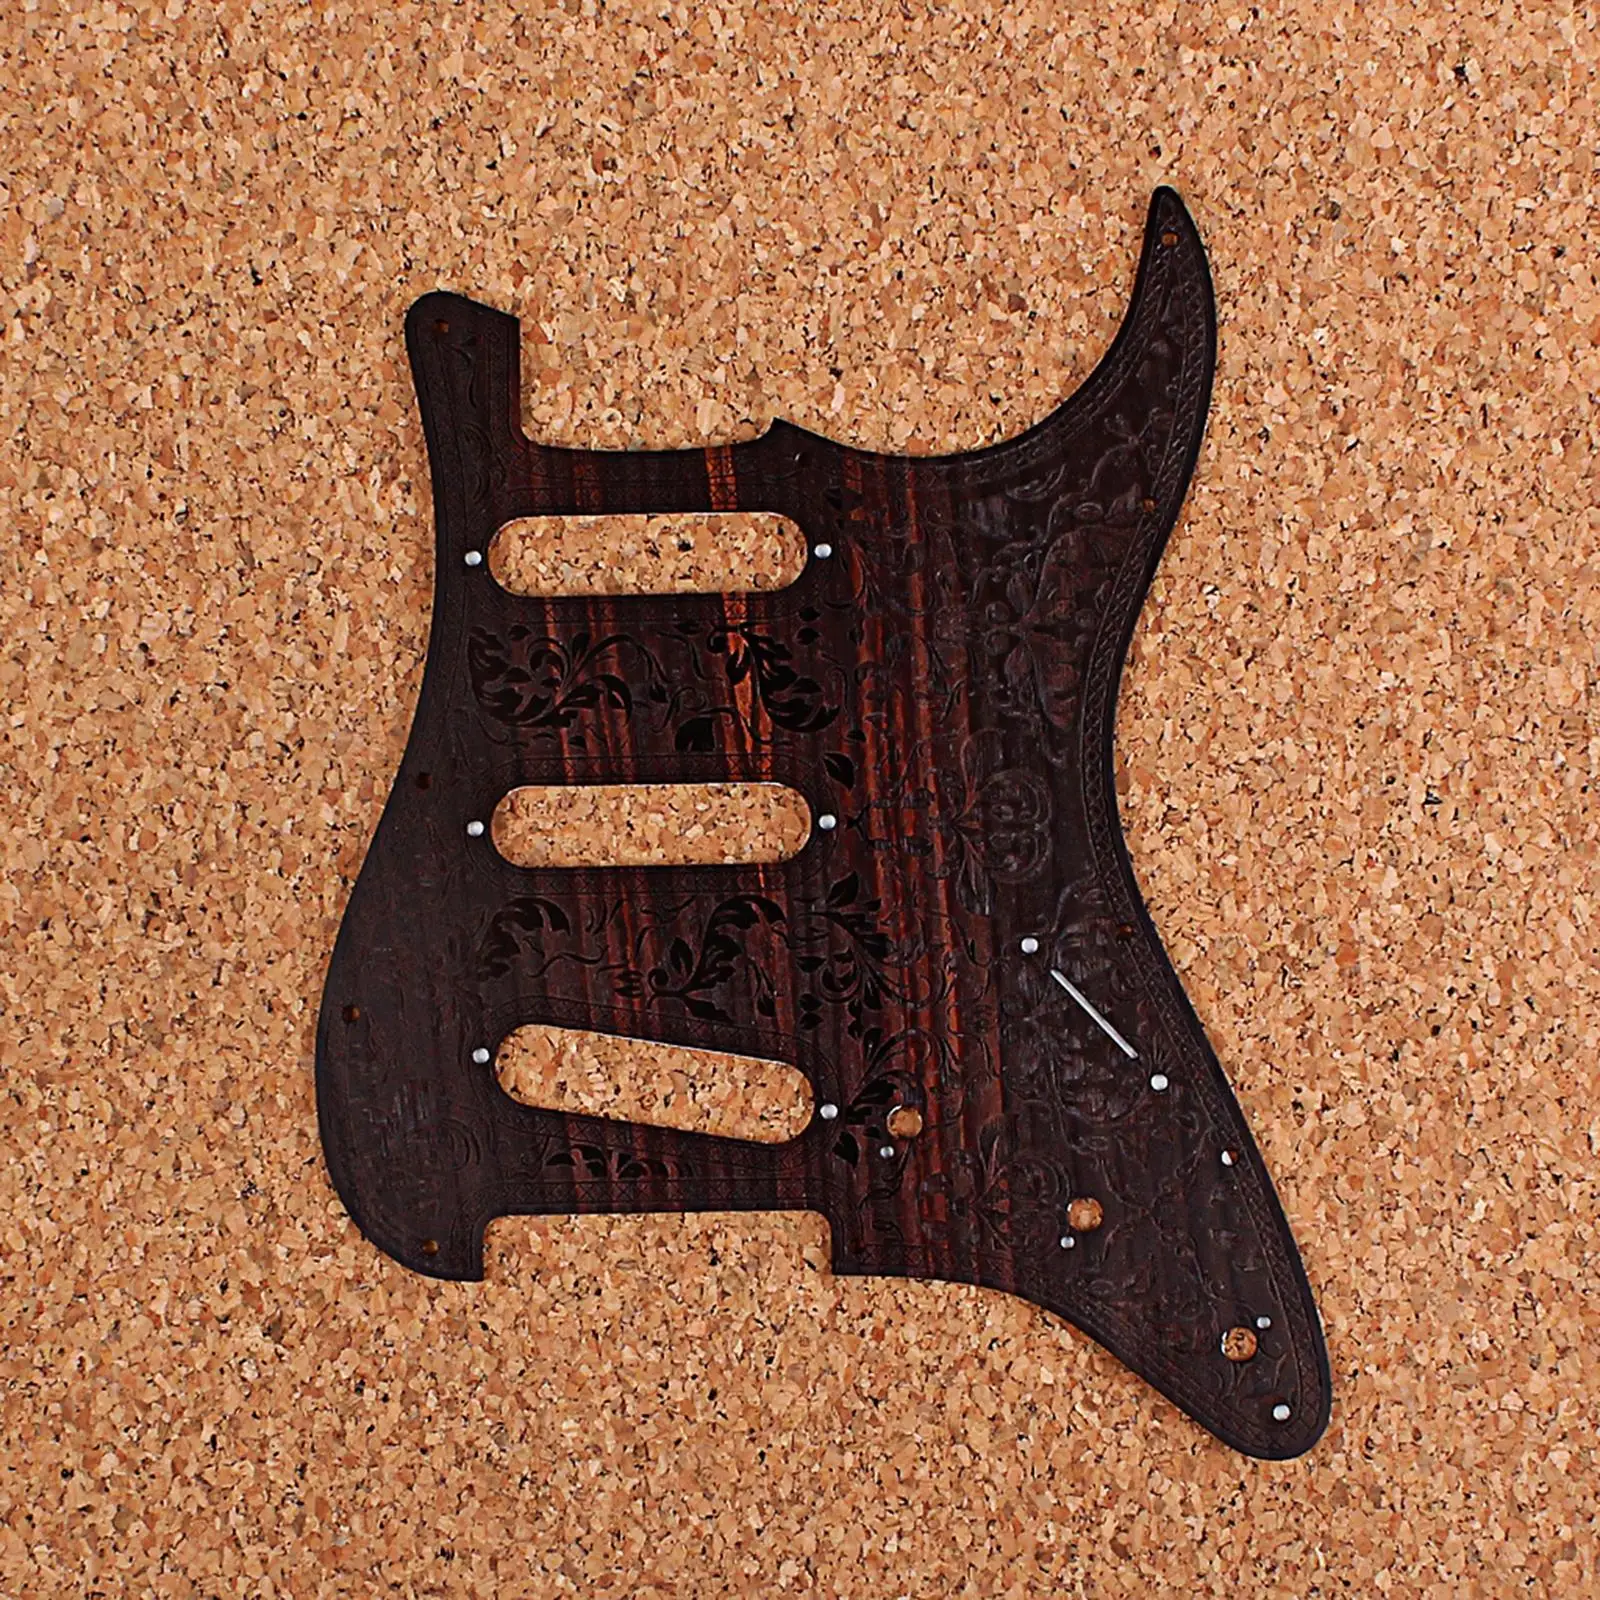 Vintage Carved Rosewood 8 Hole Electric Guitar Pickguard for ST Accs Brown